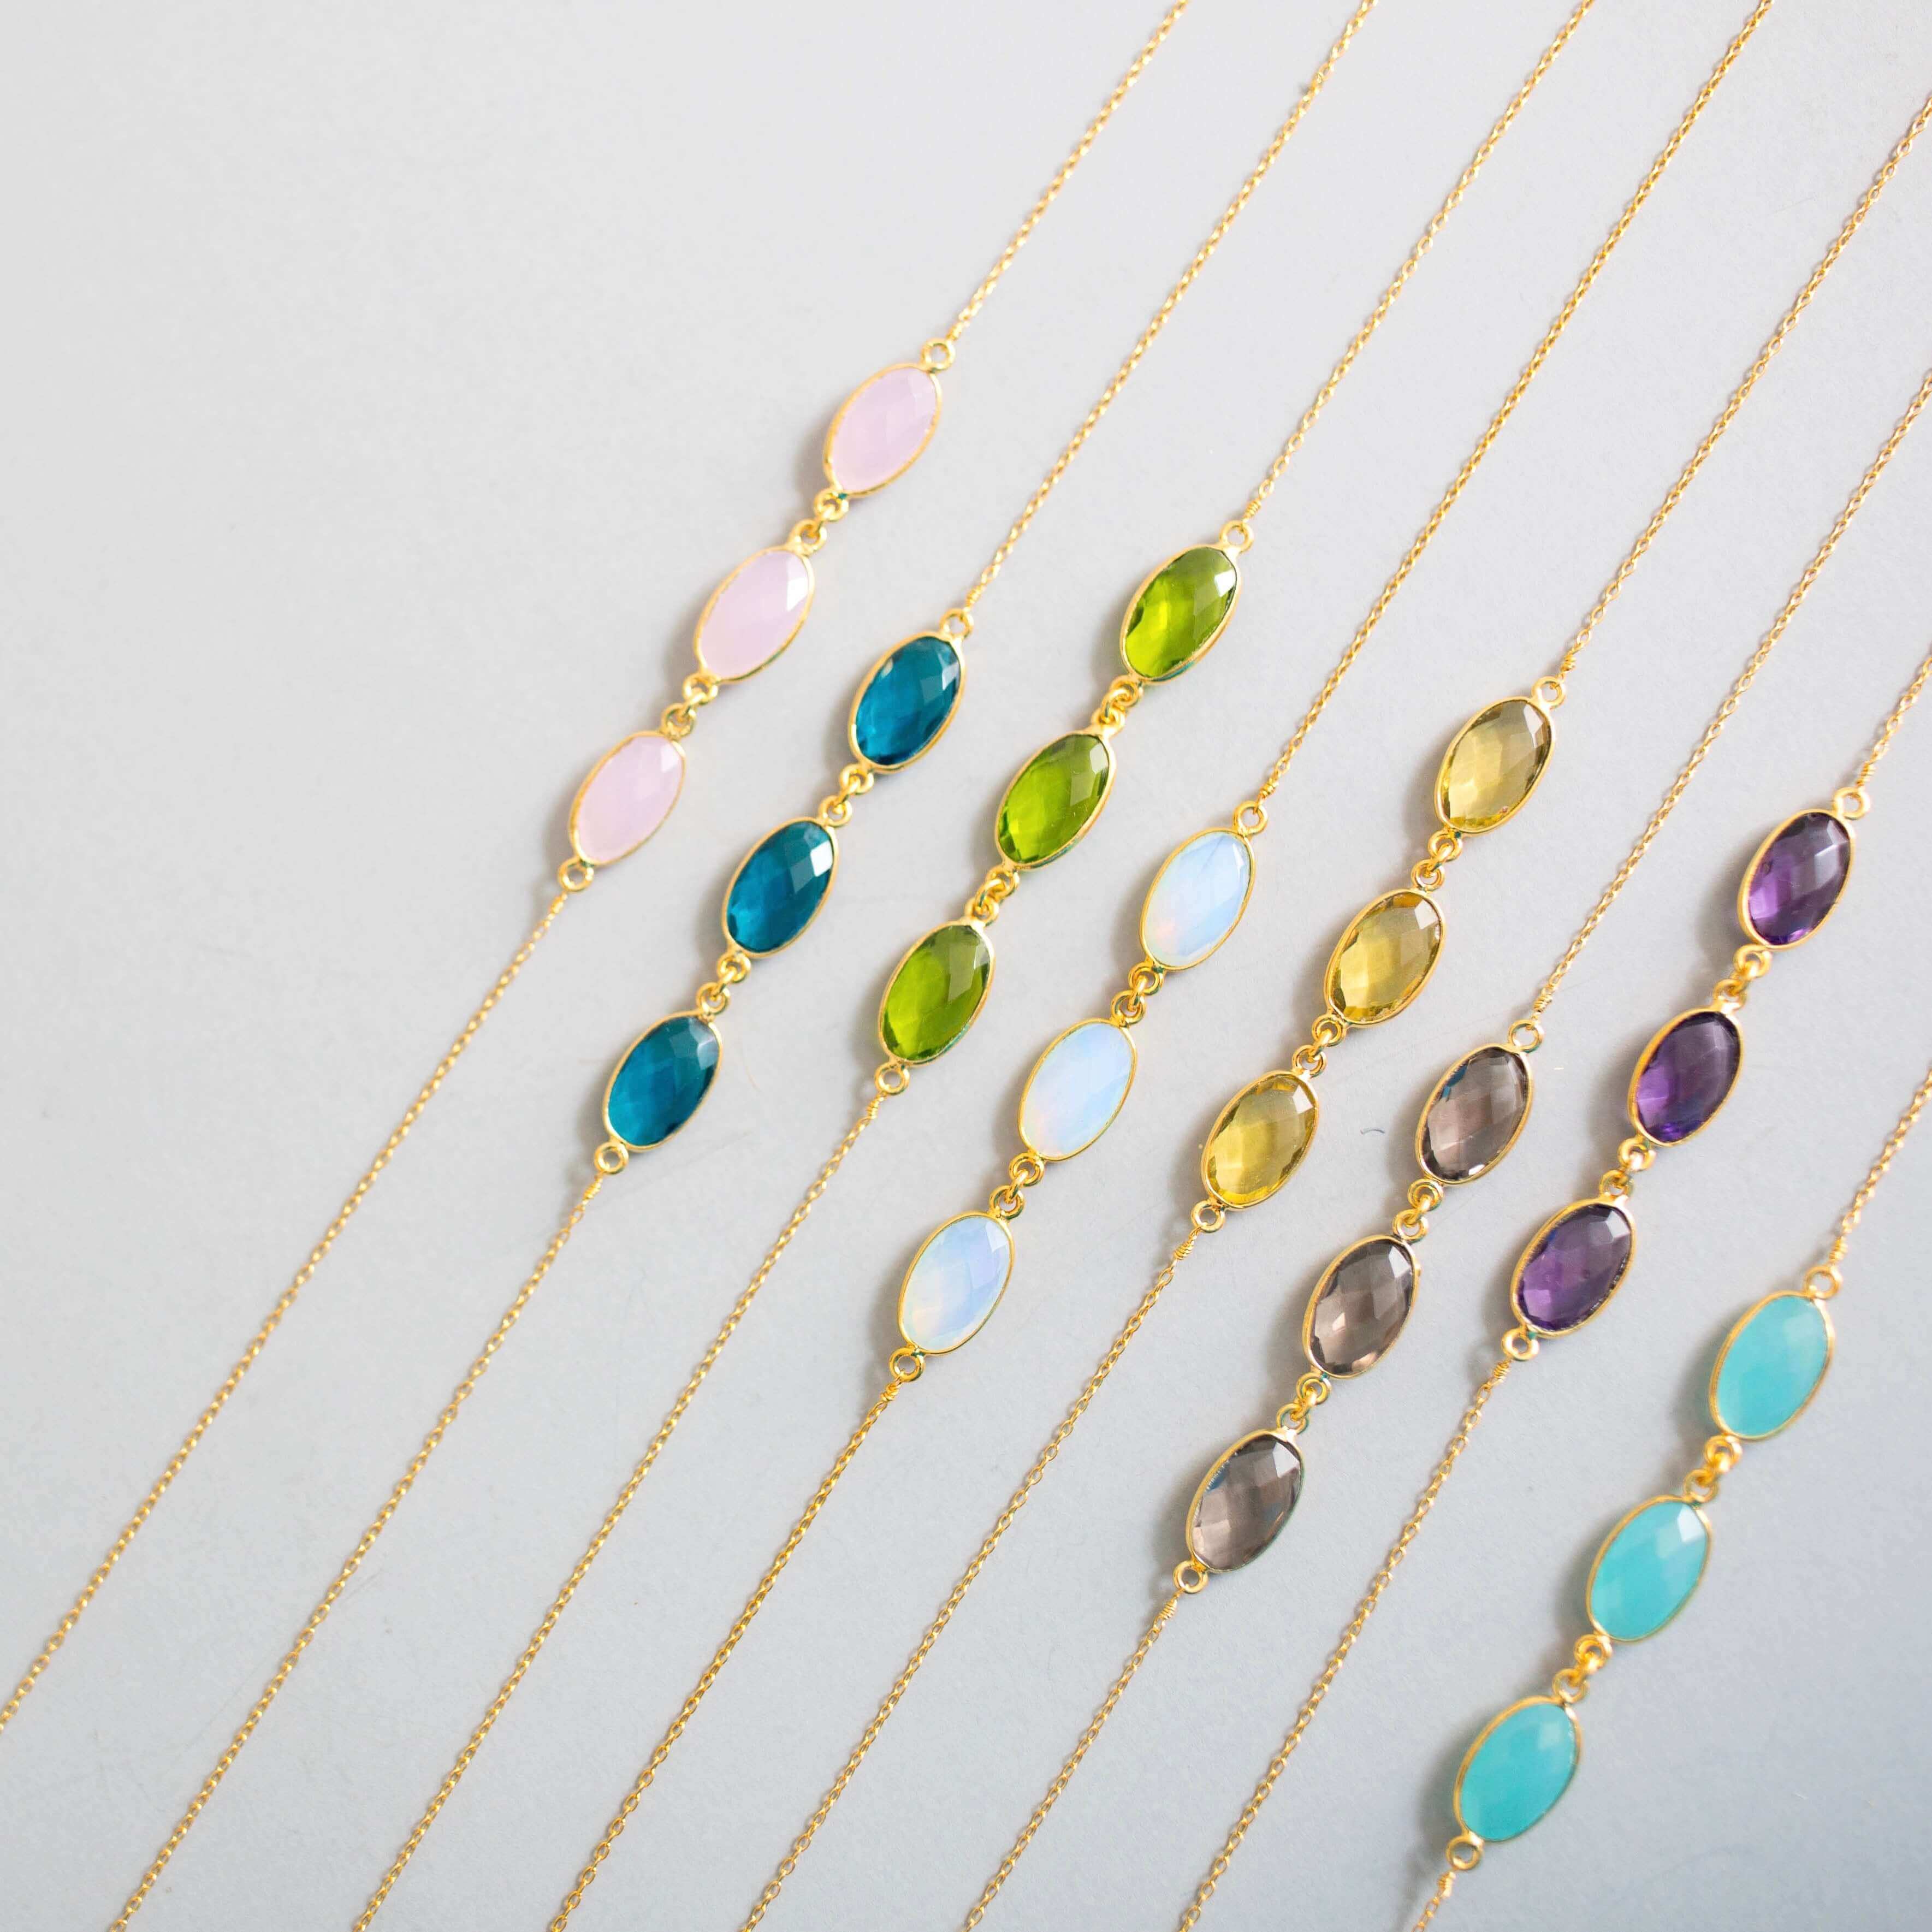 Colorful Gold Plated Necklaces with Gemstones